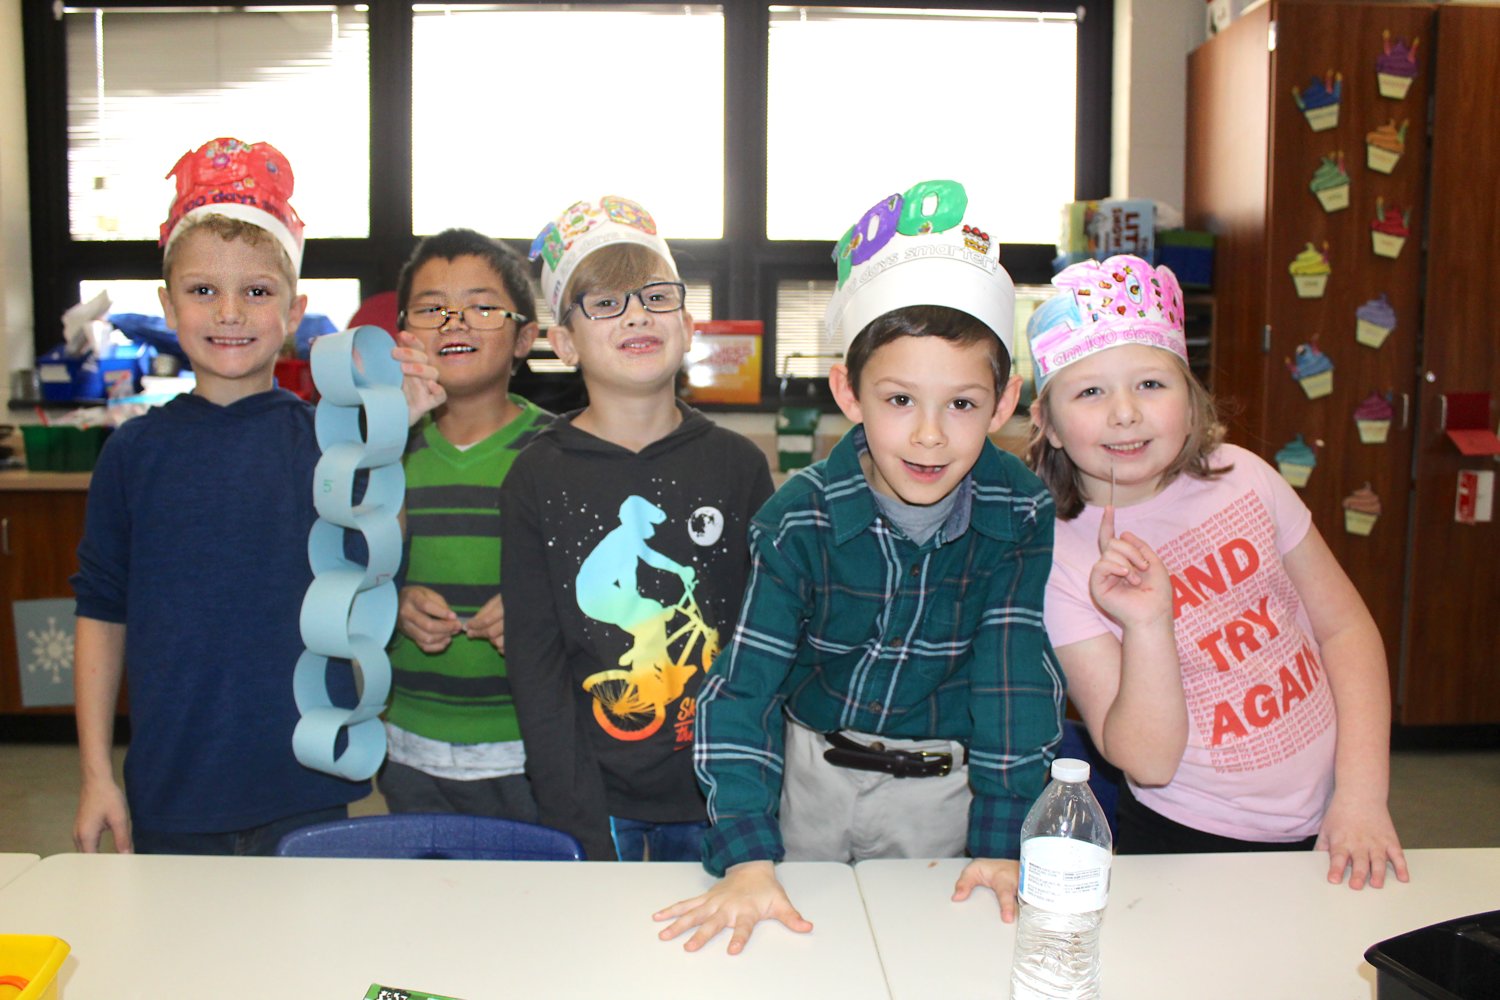 Taking a break from their 100-link paper chain project during their 100th day of the 2019-20 school year Wednesday at Hose Elementary are: First-grade students Gavin Cope, 7; Adam Tran, 6; Wylder Norwood, 7; Jonah Kiefer, 7; and Ashtyn Green, 7.